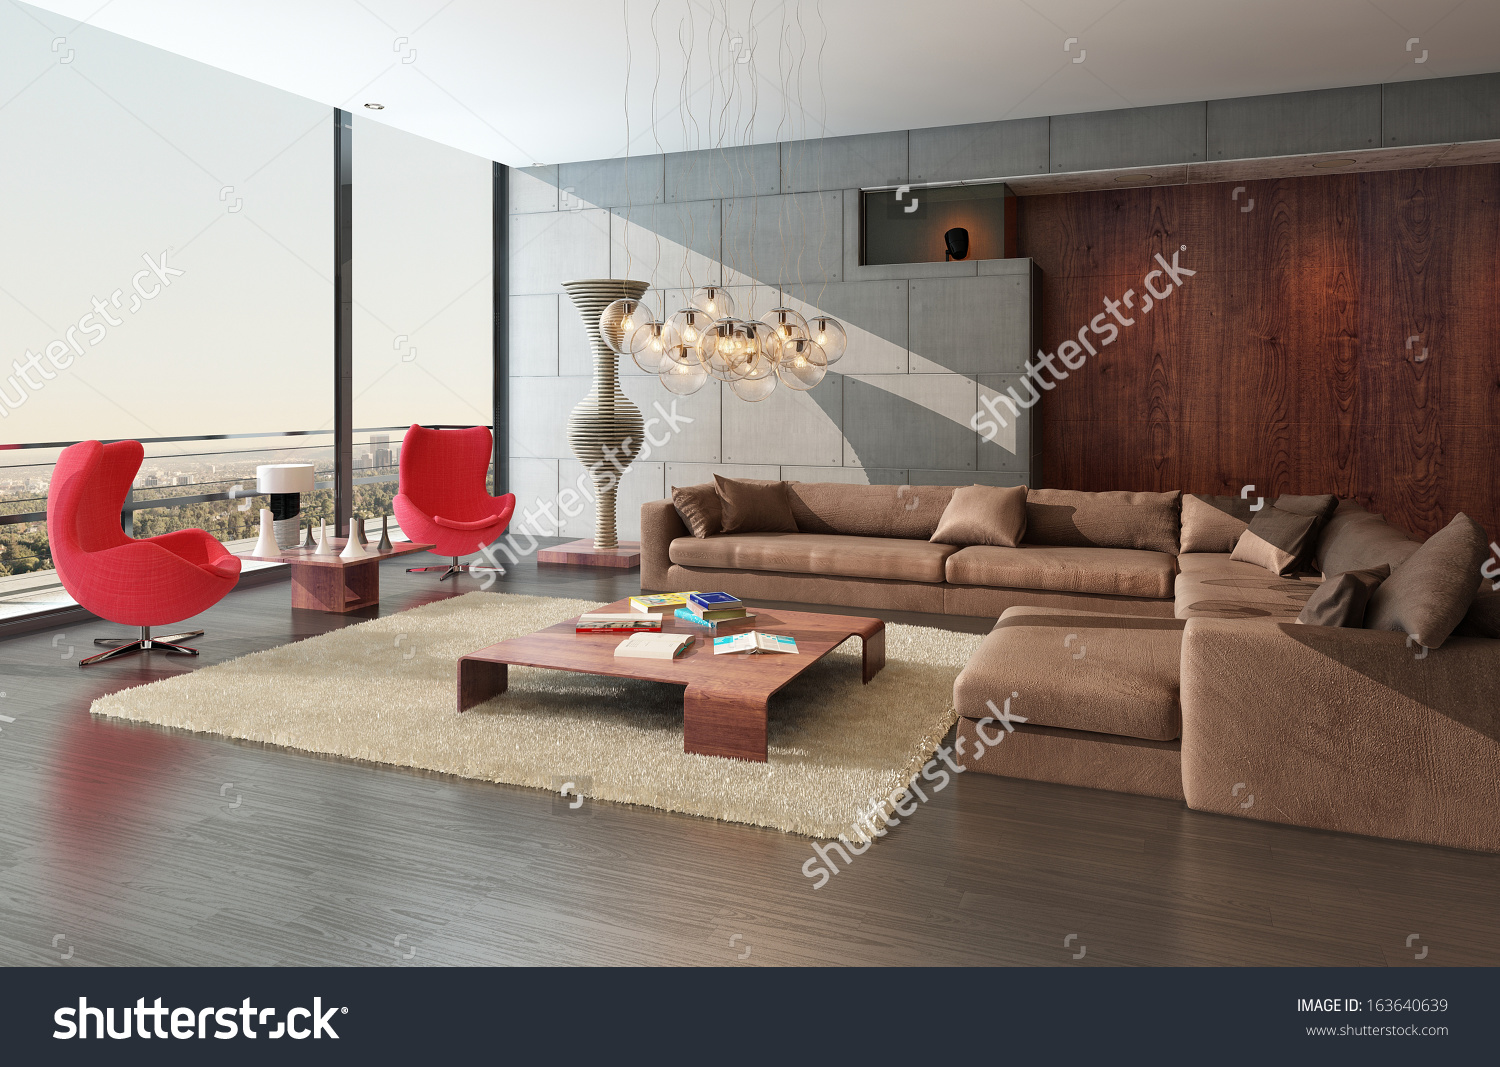 stock-photo-modern-wooden-living-room-interior-with-couch-and-two-red-armchairs-163640639